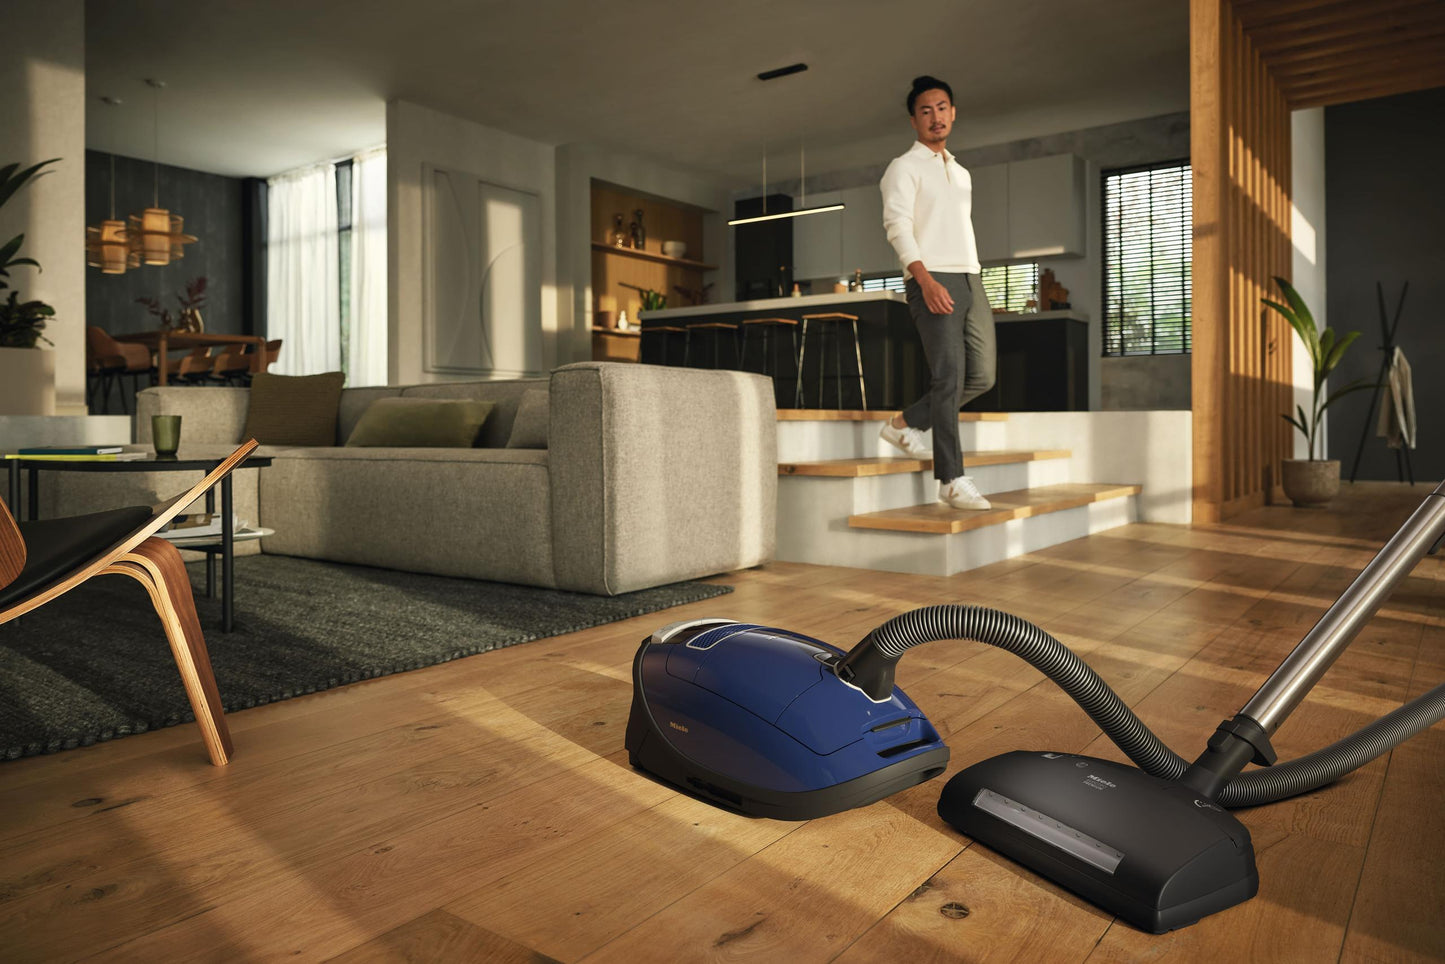 Miele COMPLETEC3MARINPOWERLINESGJE0MARINEBLUE Complete C3 Marin Powerline - Sgje0 - Canister Vacuum Cleaners With Electrobrush For Thorough Cleaning Of Heavy-Duty Carpeting.